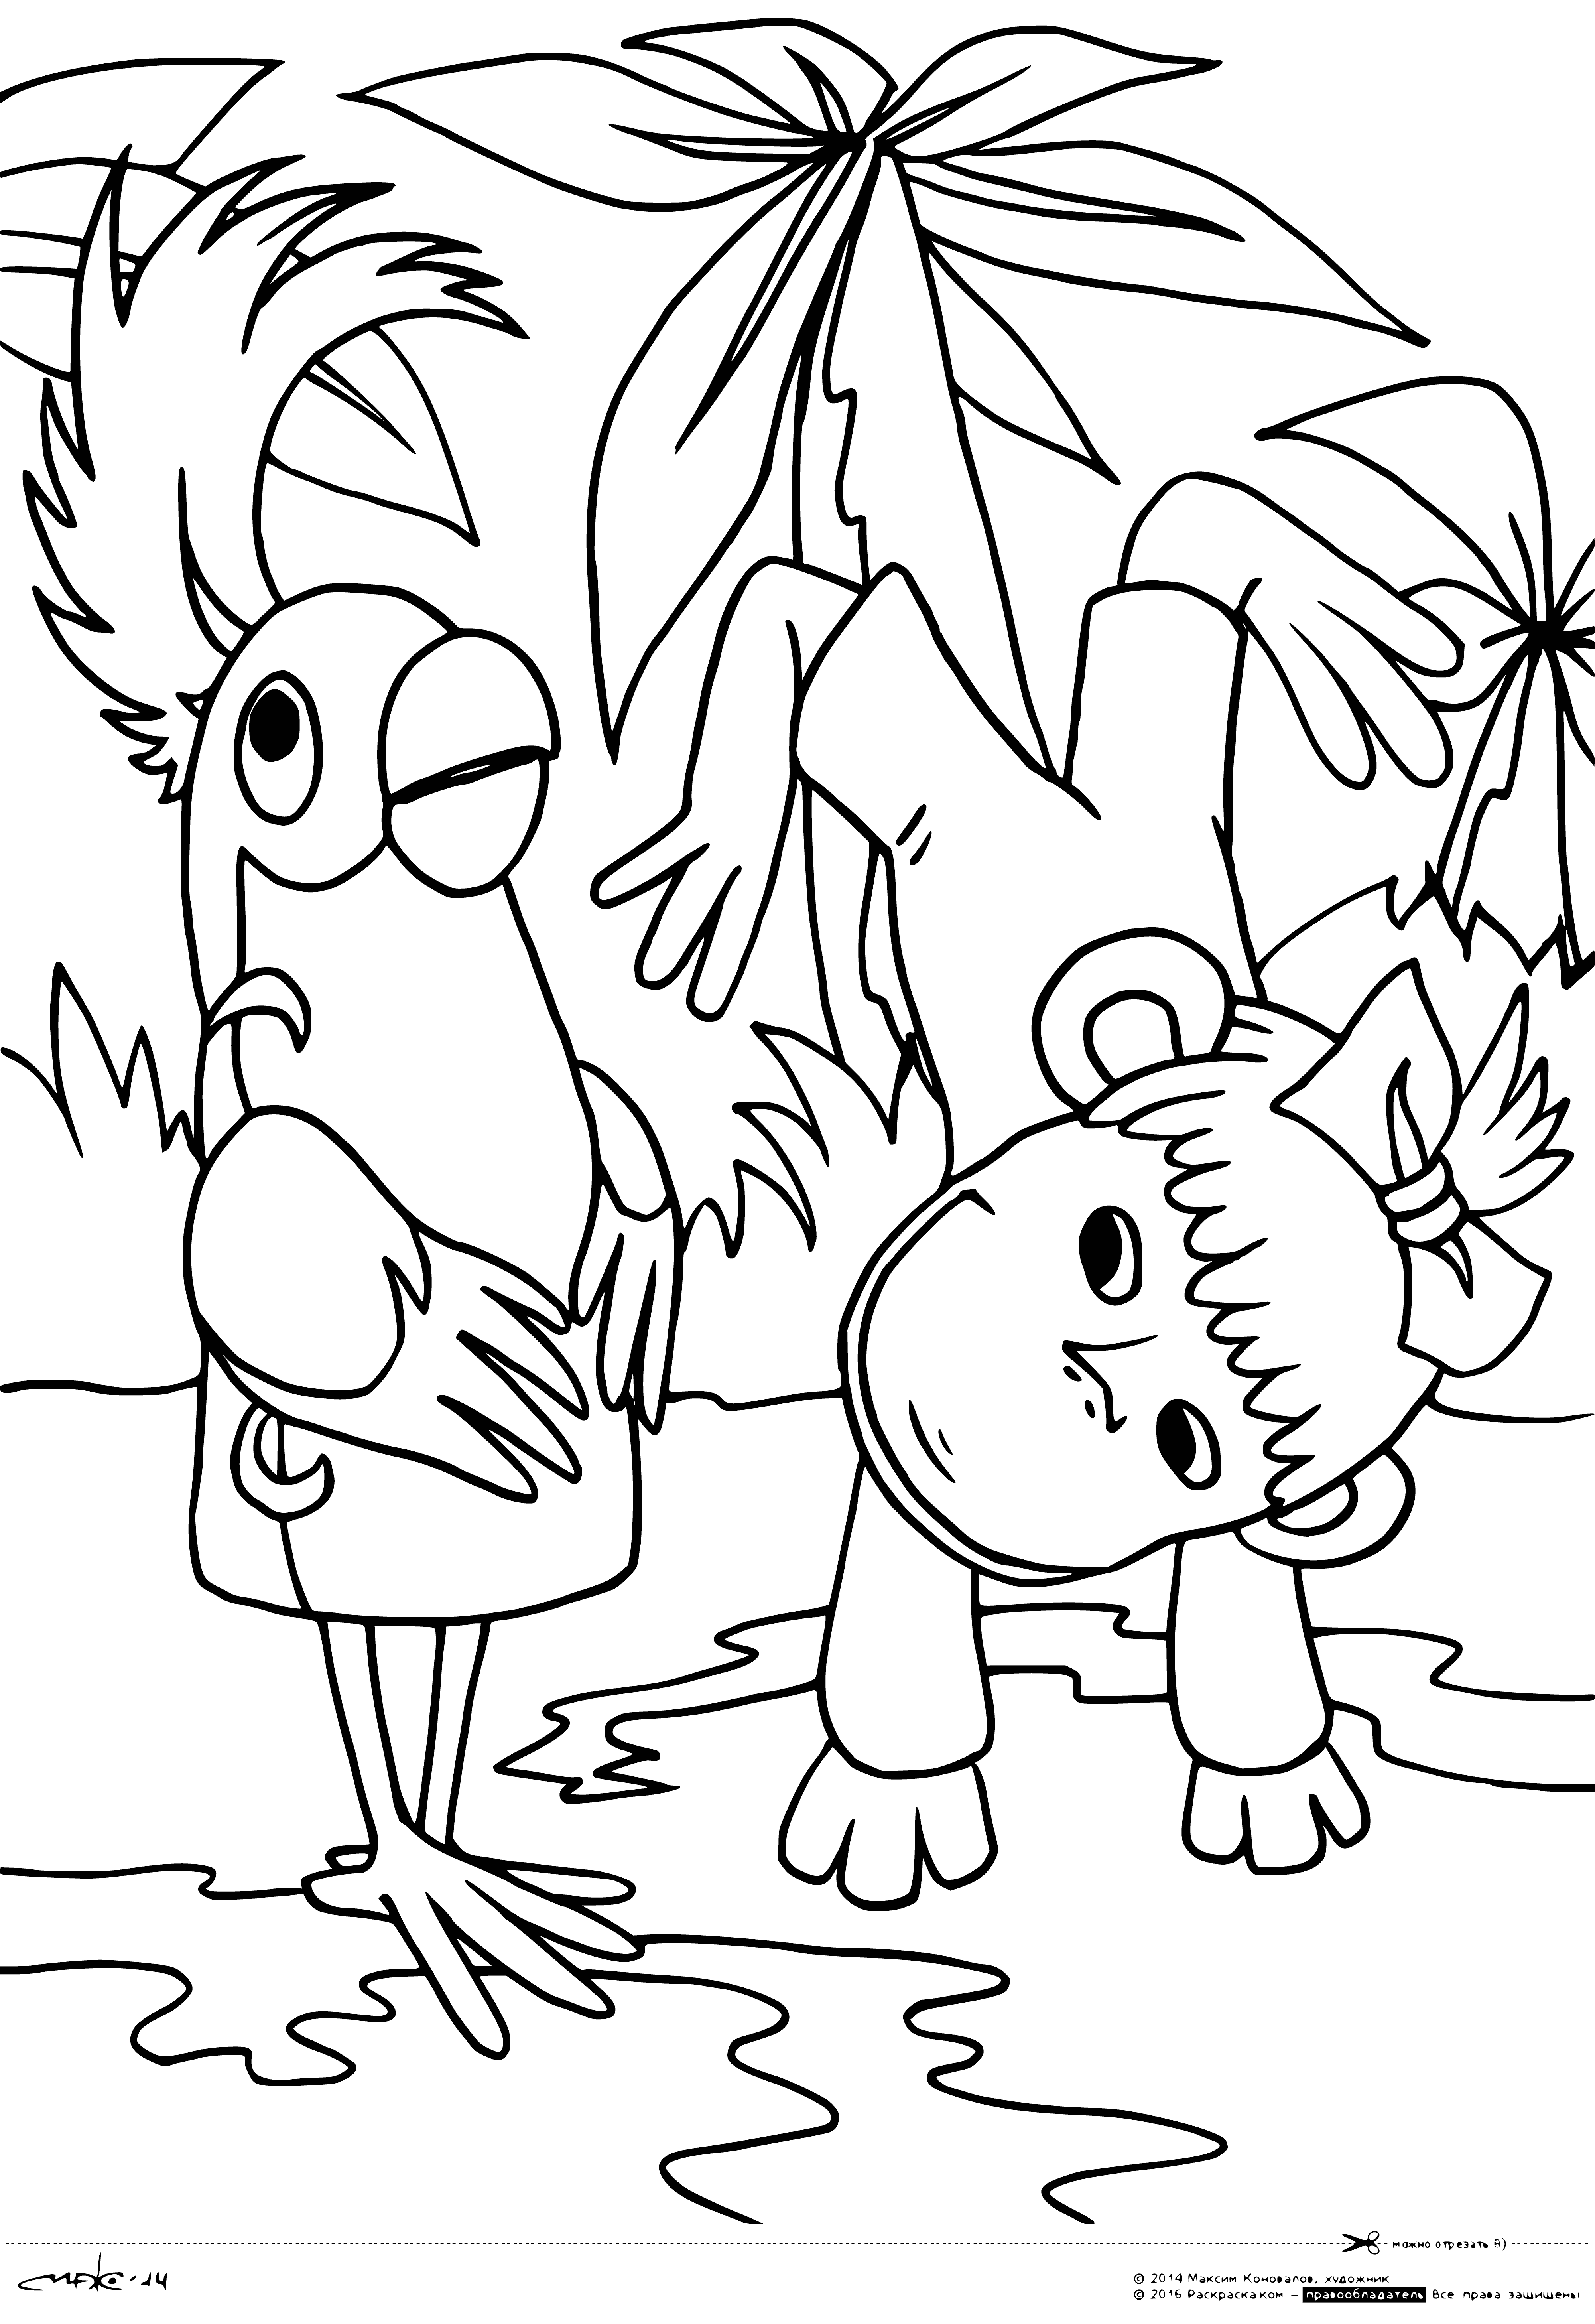 coloring page: 38 parrots & 1 monkey in a coloring page. Parrots are different colors & monkey is brown. Some parrots on the monkey's head, some flying.